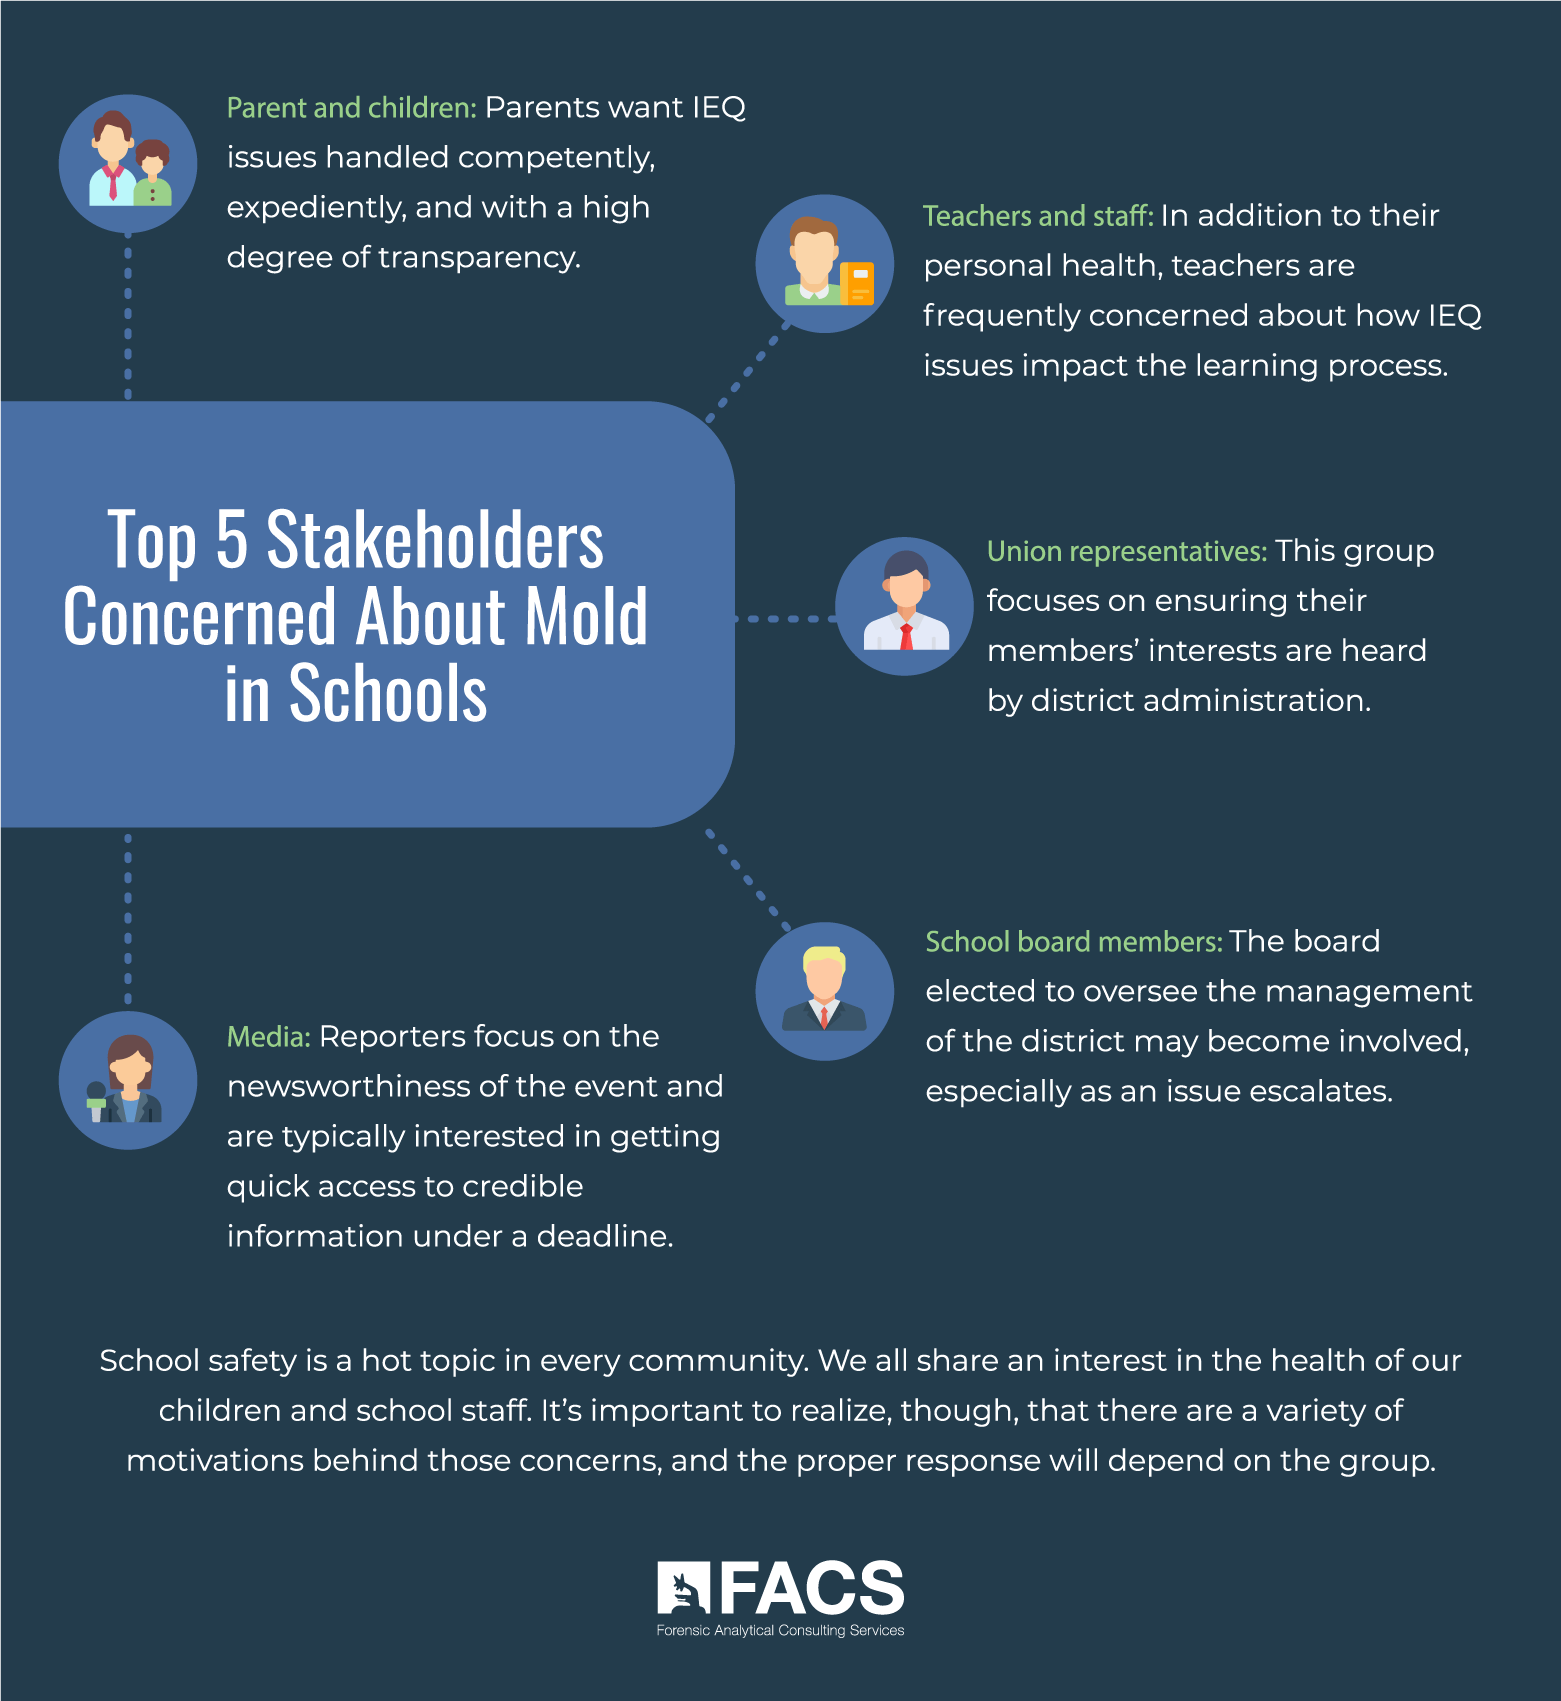 Mold in schools and the primary stakeholders. Graphic.